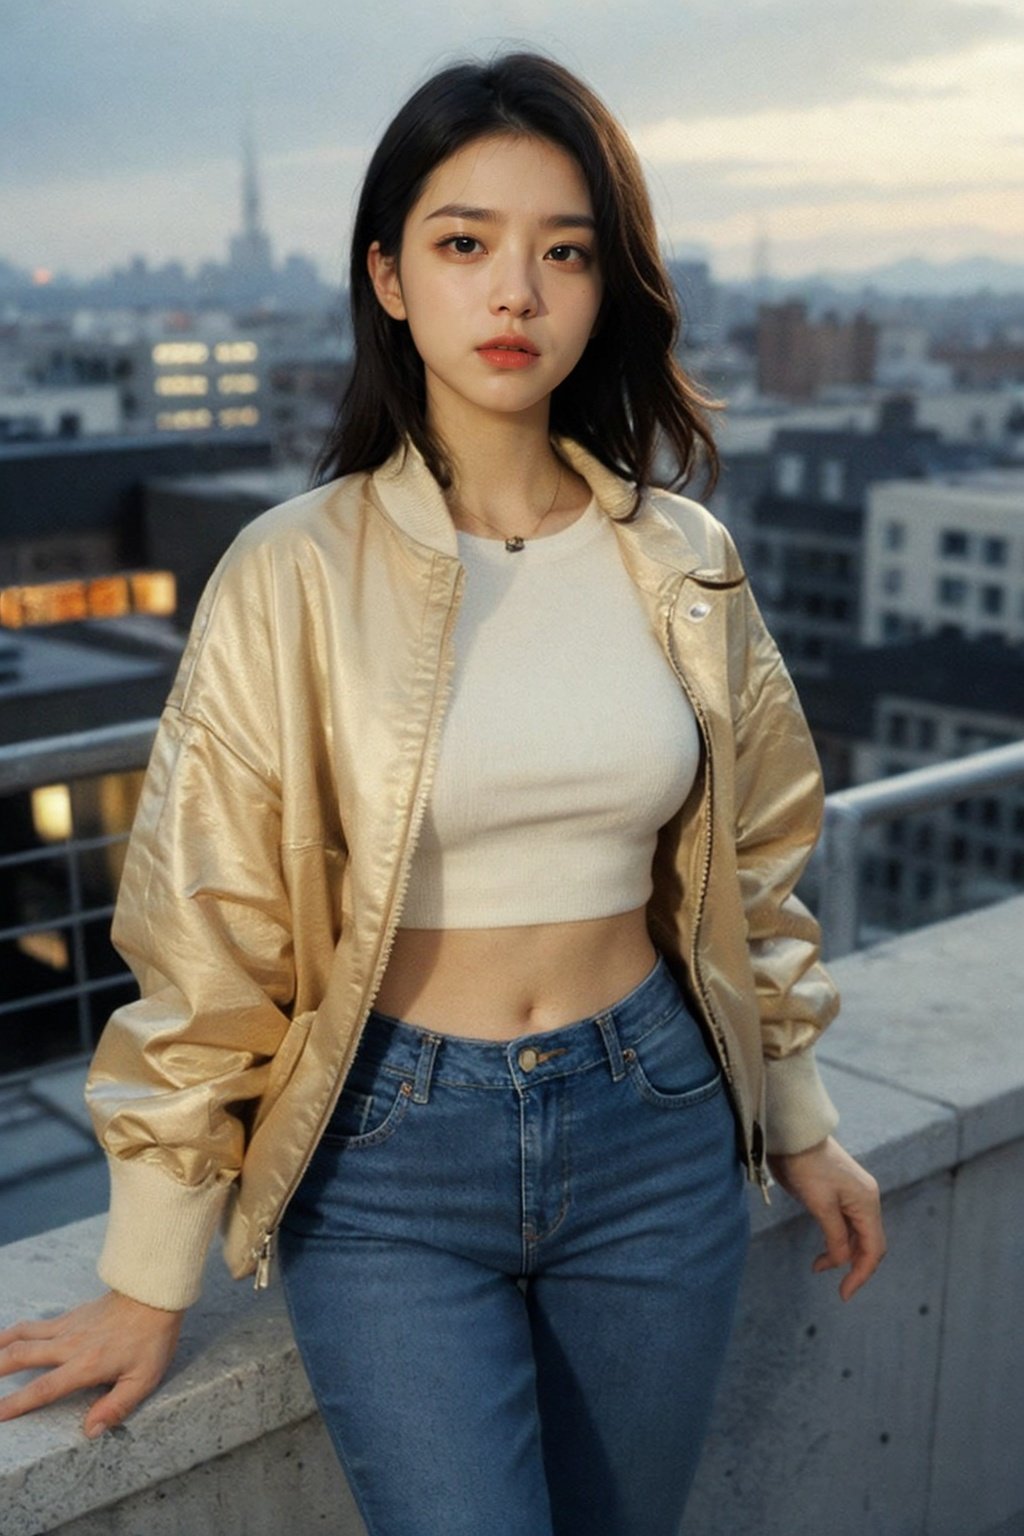 1girl, stylish outfit, fitted jeans, oversized jacket, fashionable accessories, (realistic detailed eyes, natural skin texture, confident expression), cityscape backdrop, rooftop or high-rise balcony, dynamic composition, engaging pose, soft yet striking lighting, shallow depth of field, bokeh from city lights, sharp details, highly detailed, hyper-realistic, 50mm lens, naturally blurred background.